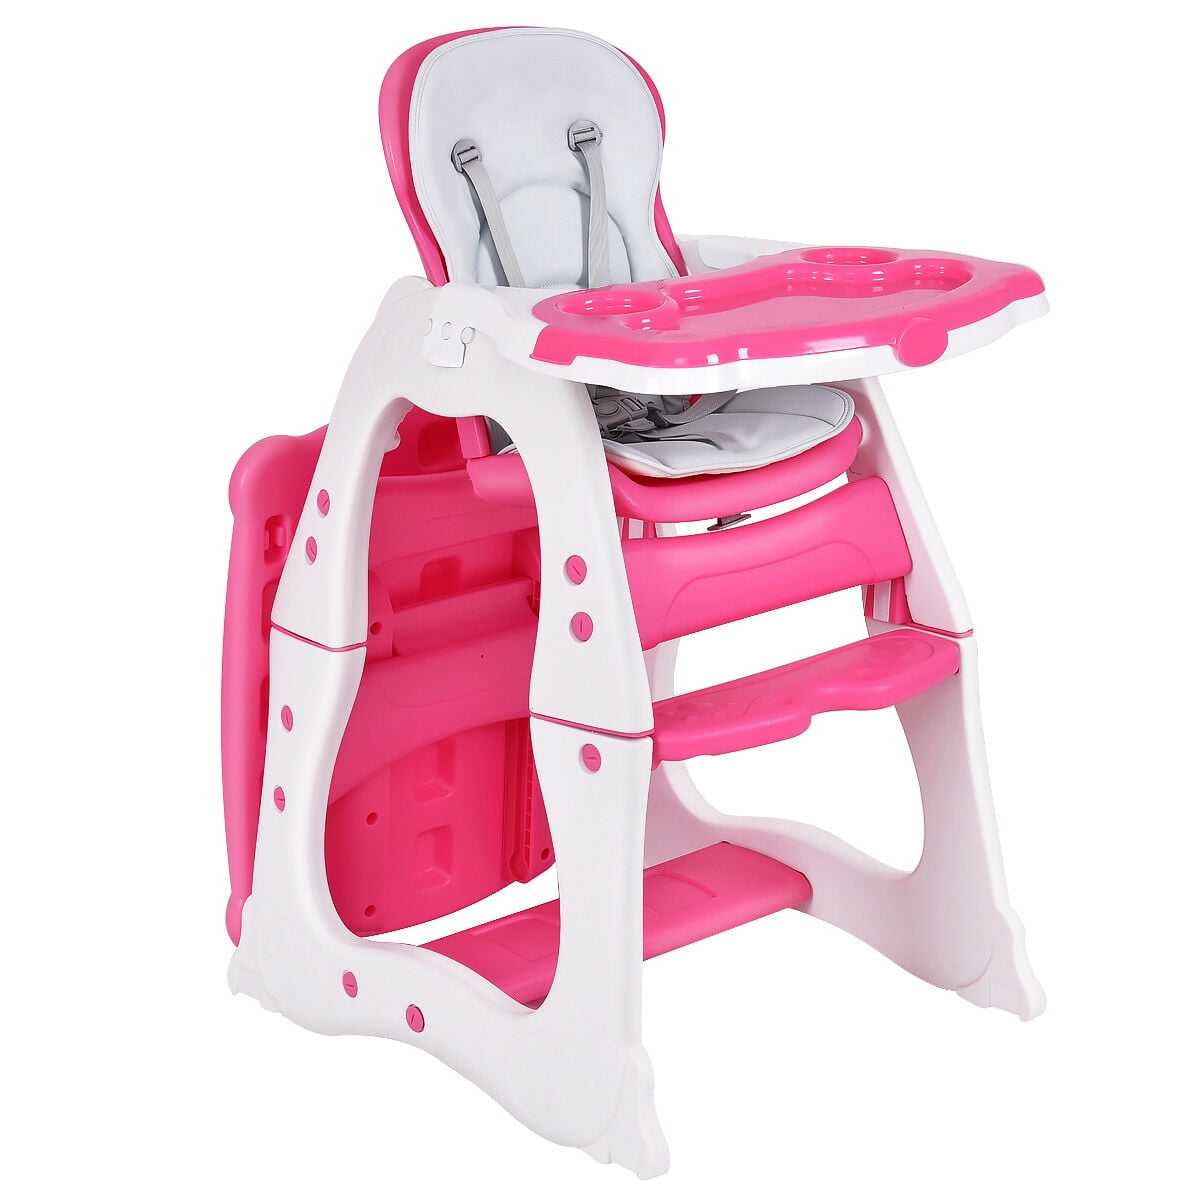 Height Adjustable Infants Feeding Chair for 6 Months-6 Years Storage Basket COSTWAY Convertible Baby Highchair Safety Harness Toddlers Rocking Chair Booster Seat with Double Removable Tray